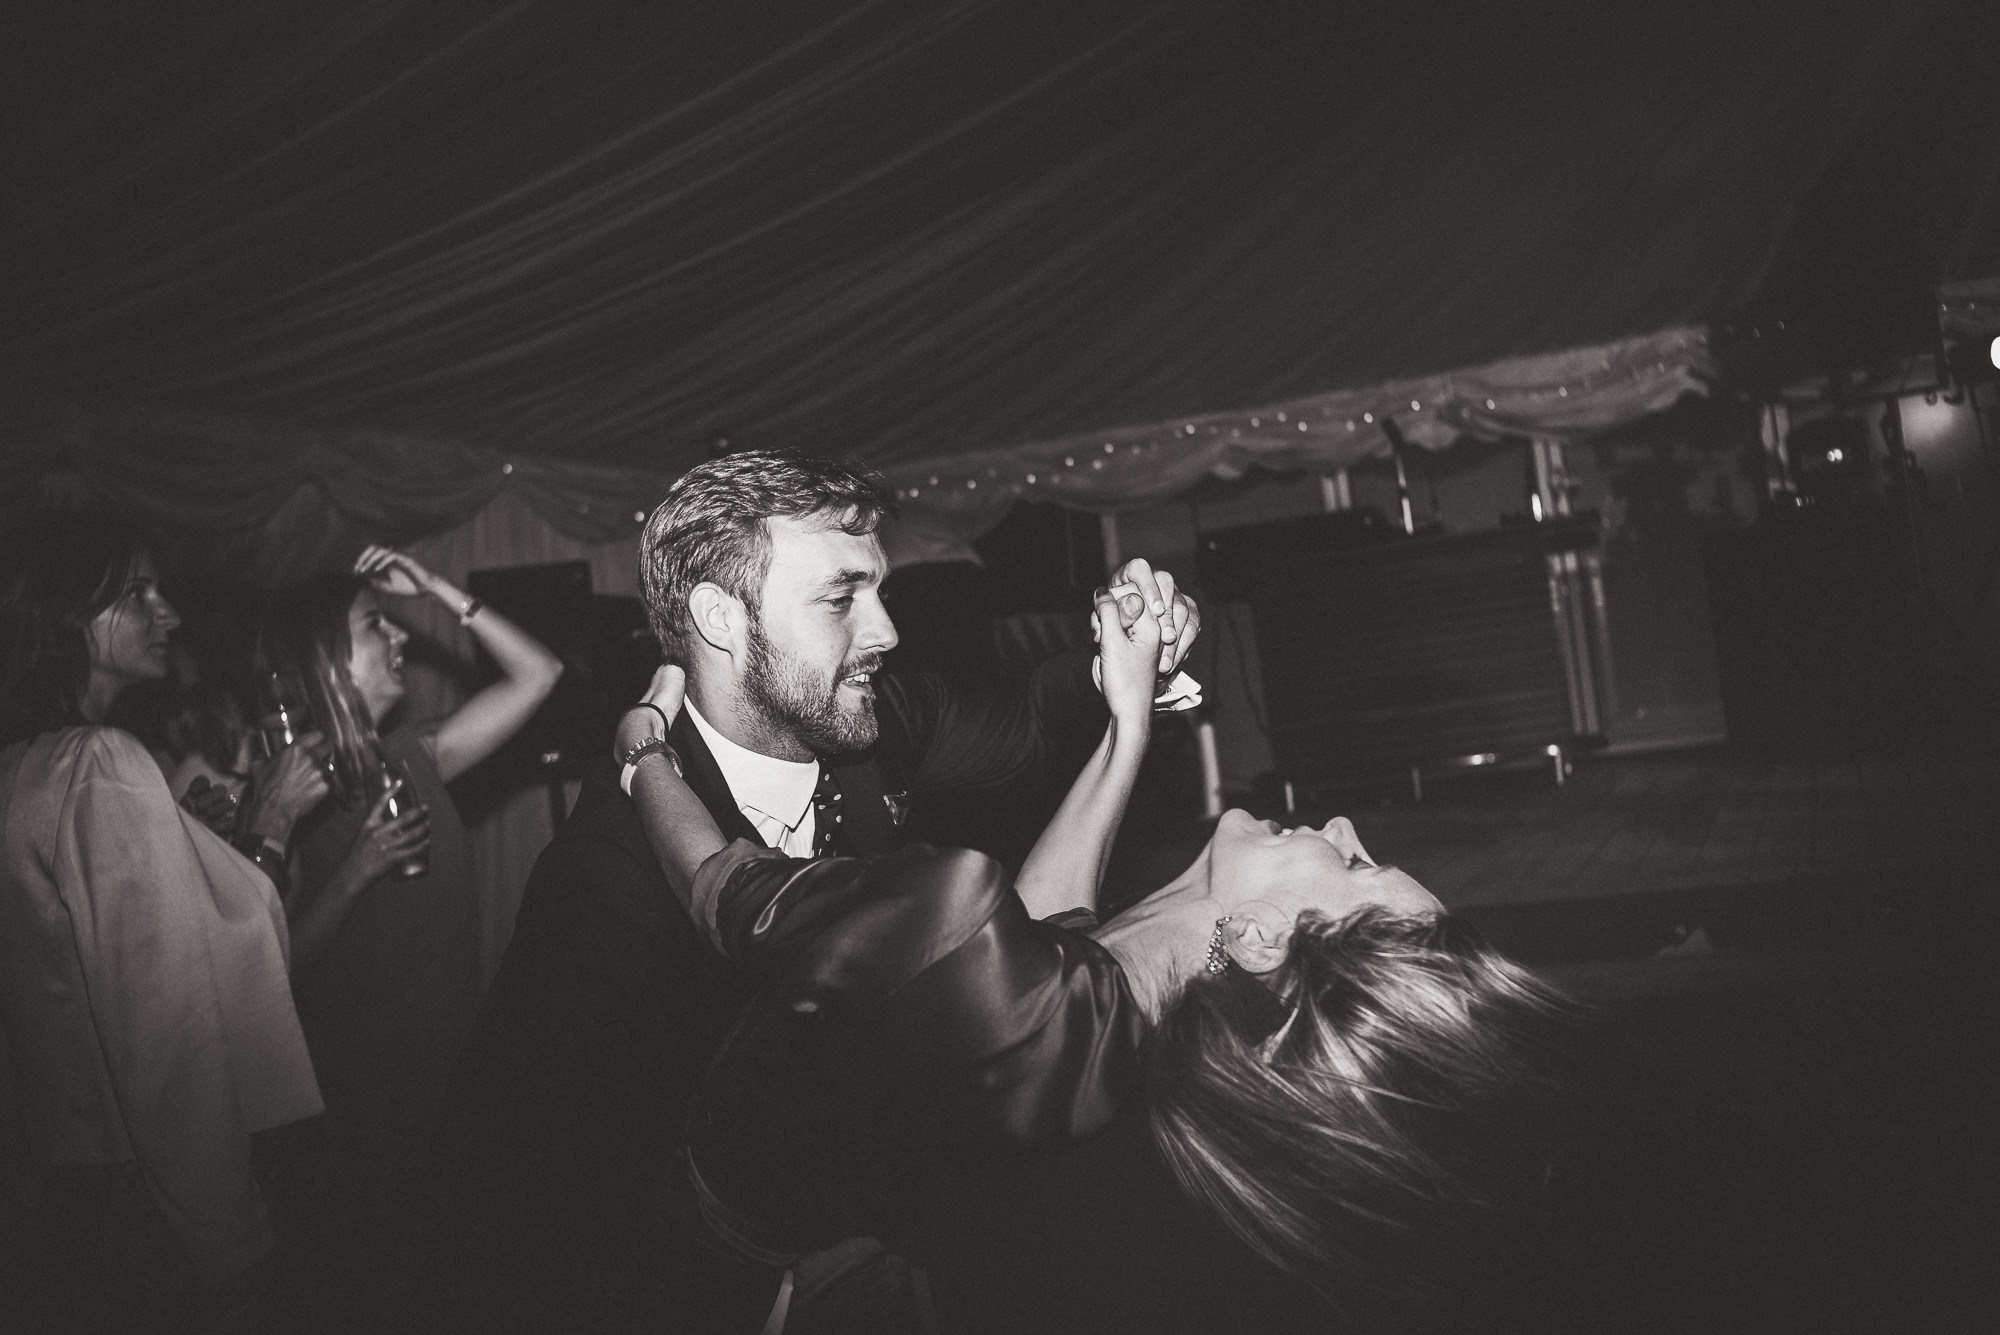 A bride and groom dancing at their wedding, captured in a heartfelt wedding photo.